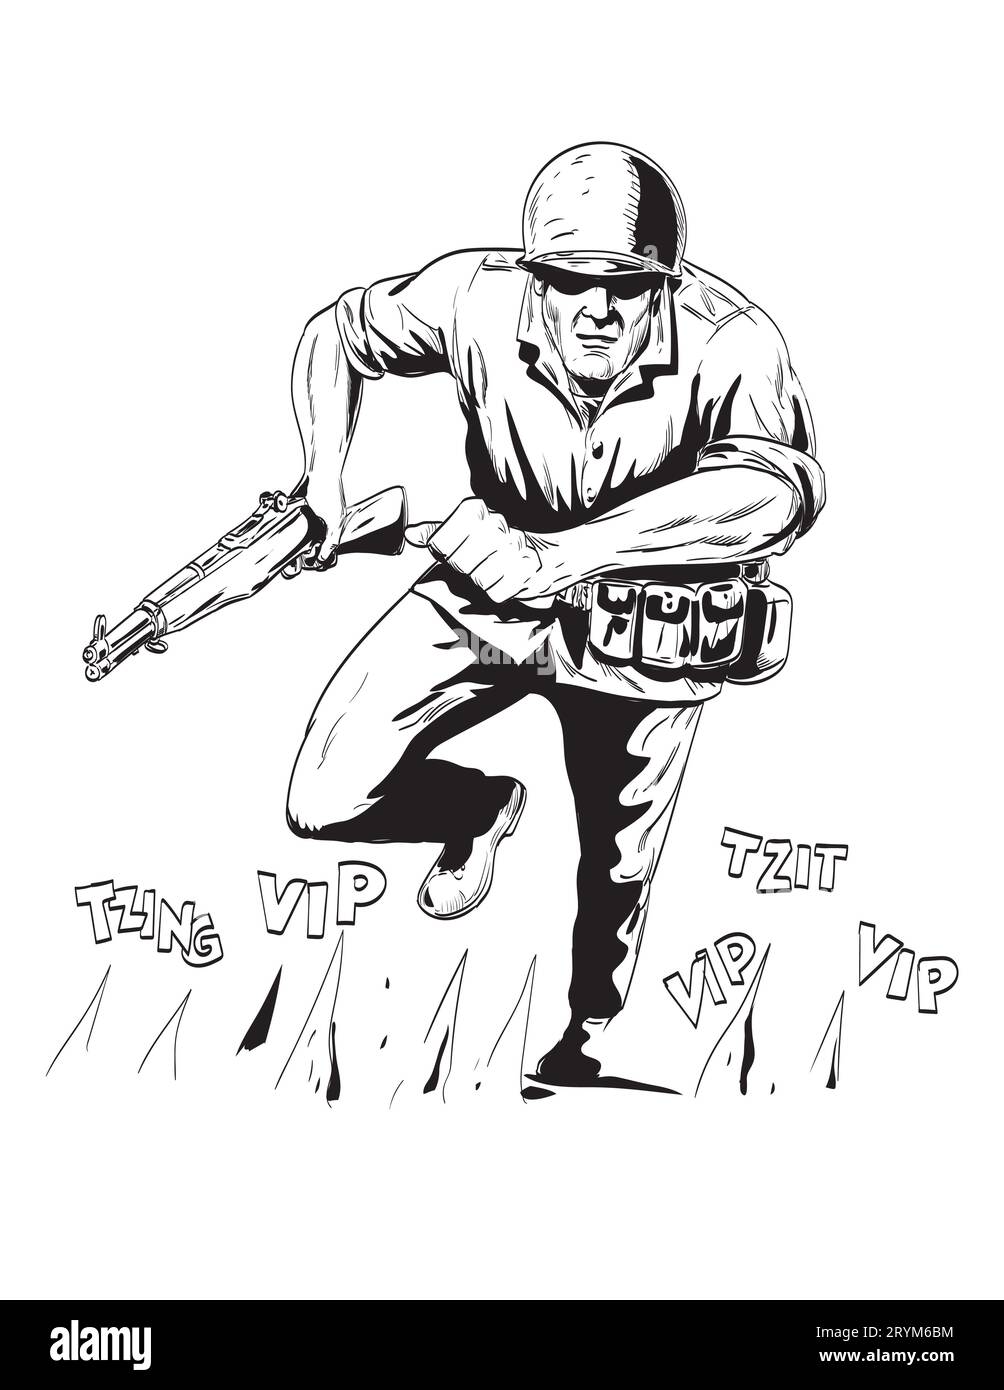 World War Two American GI Soldier Running With Rifle Front View Comics Style Drawing Stock Photo